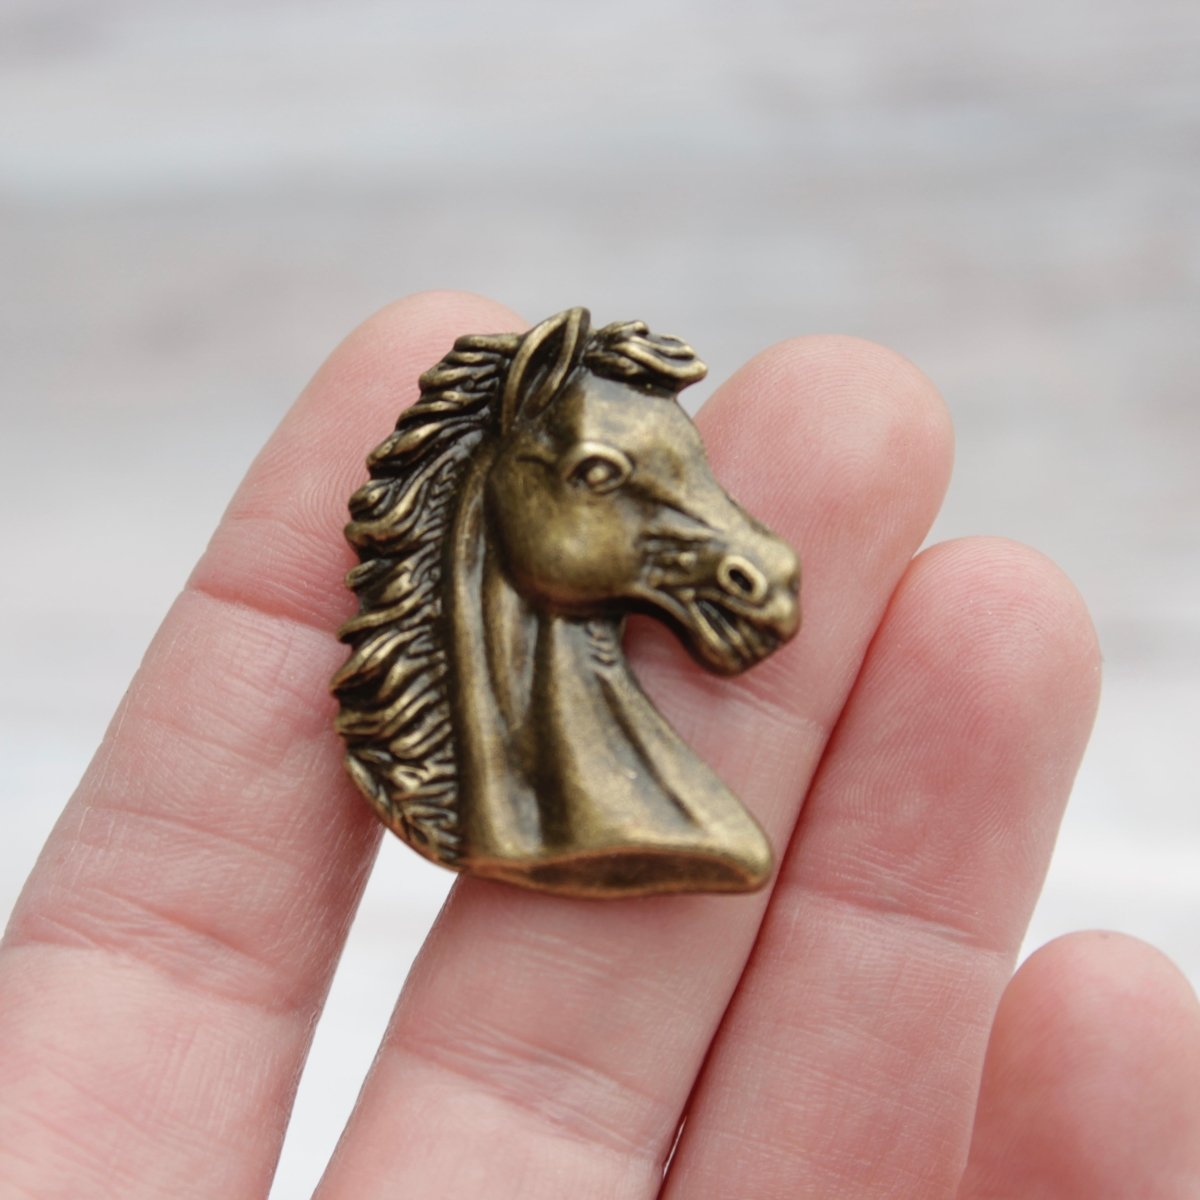 Horse Cabinet Knob in Antique Brass or Silver - DaRosa Creations